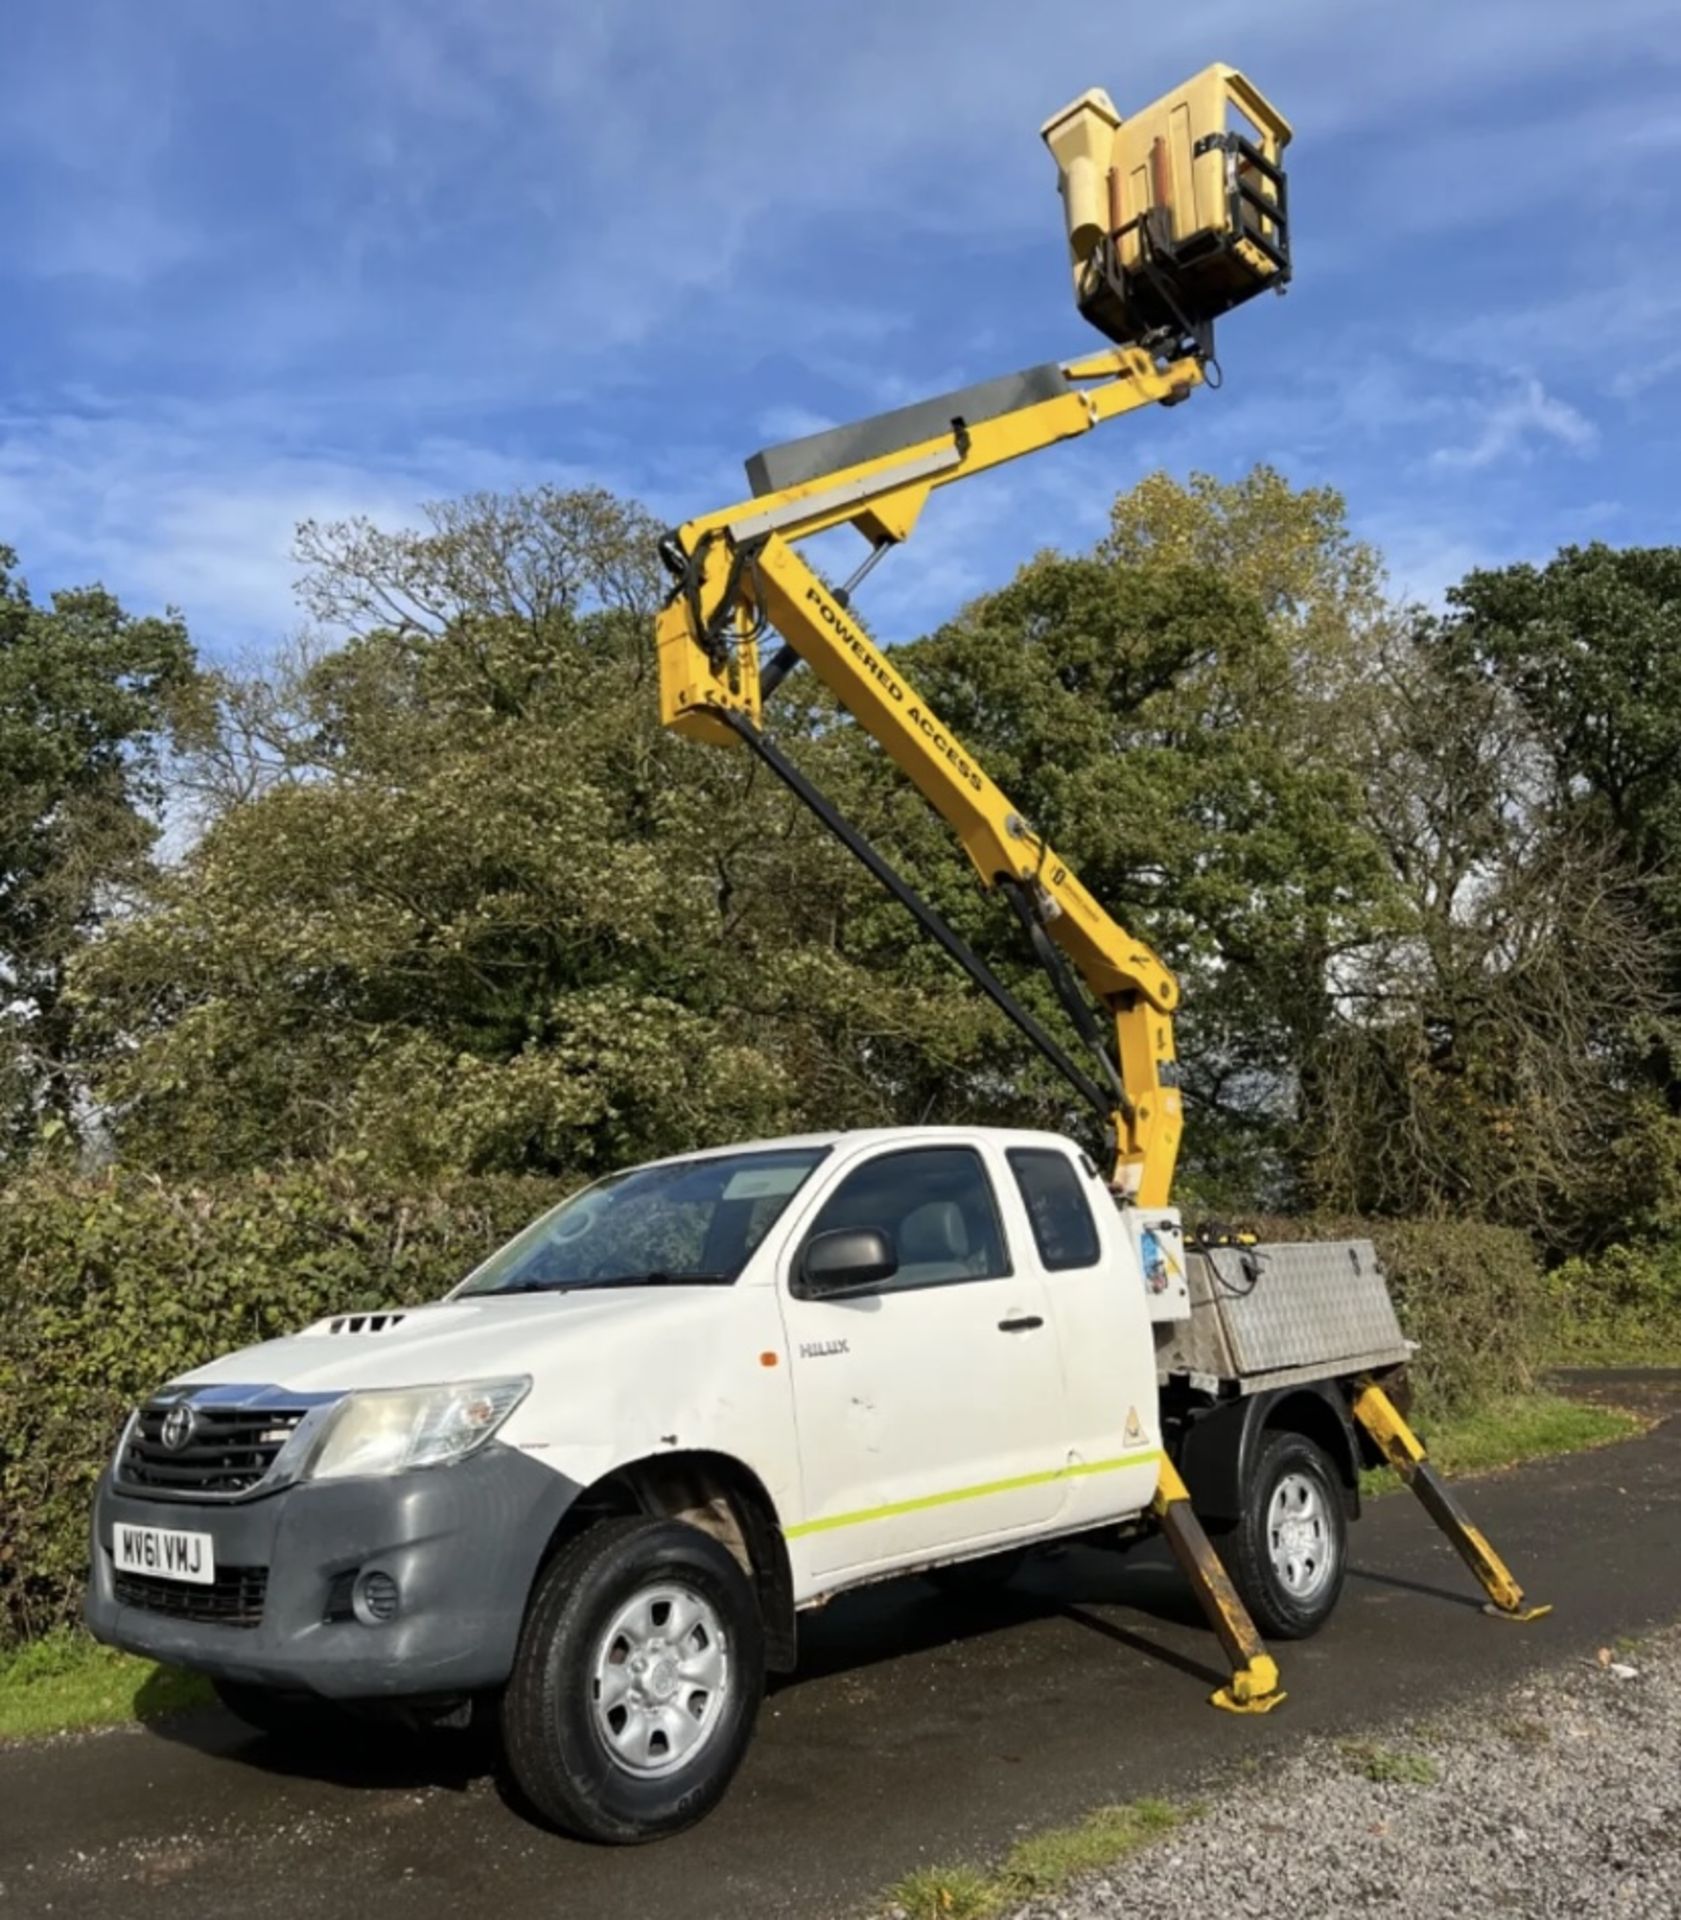 TOYOTA HILUX CHERRY PICKER 2012 - Image 8 of 8